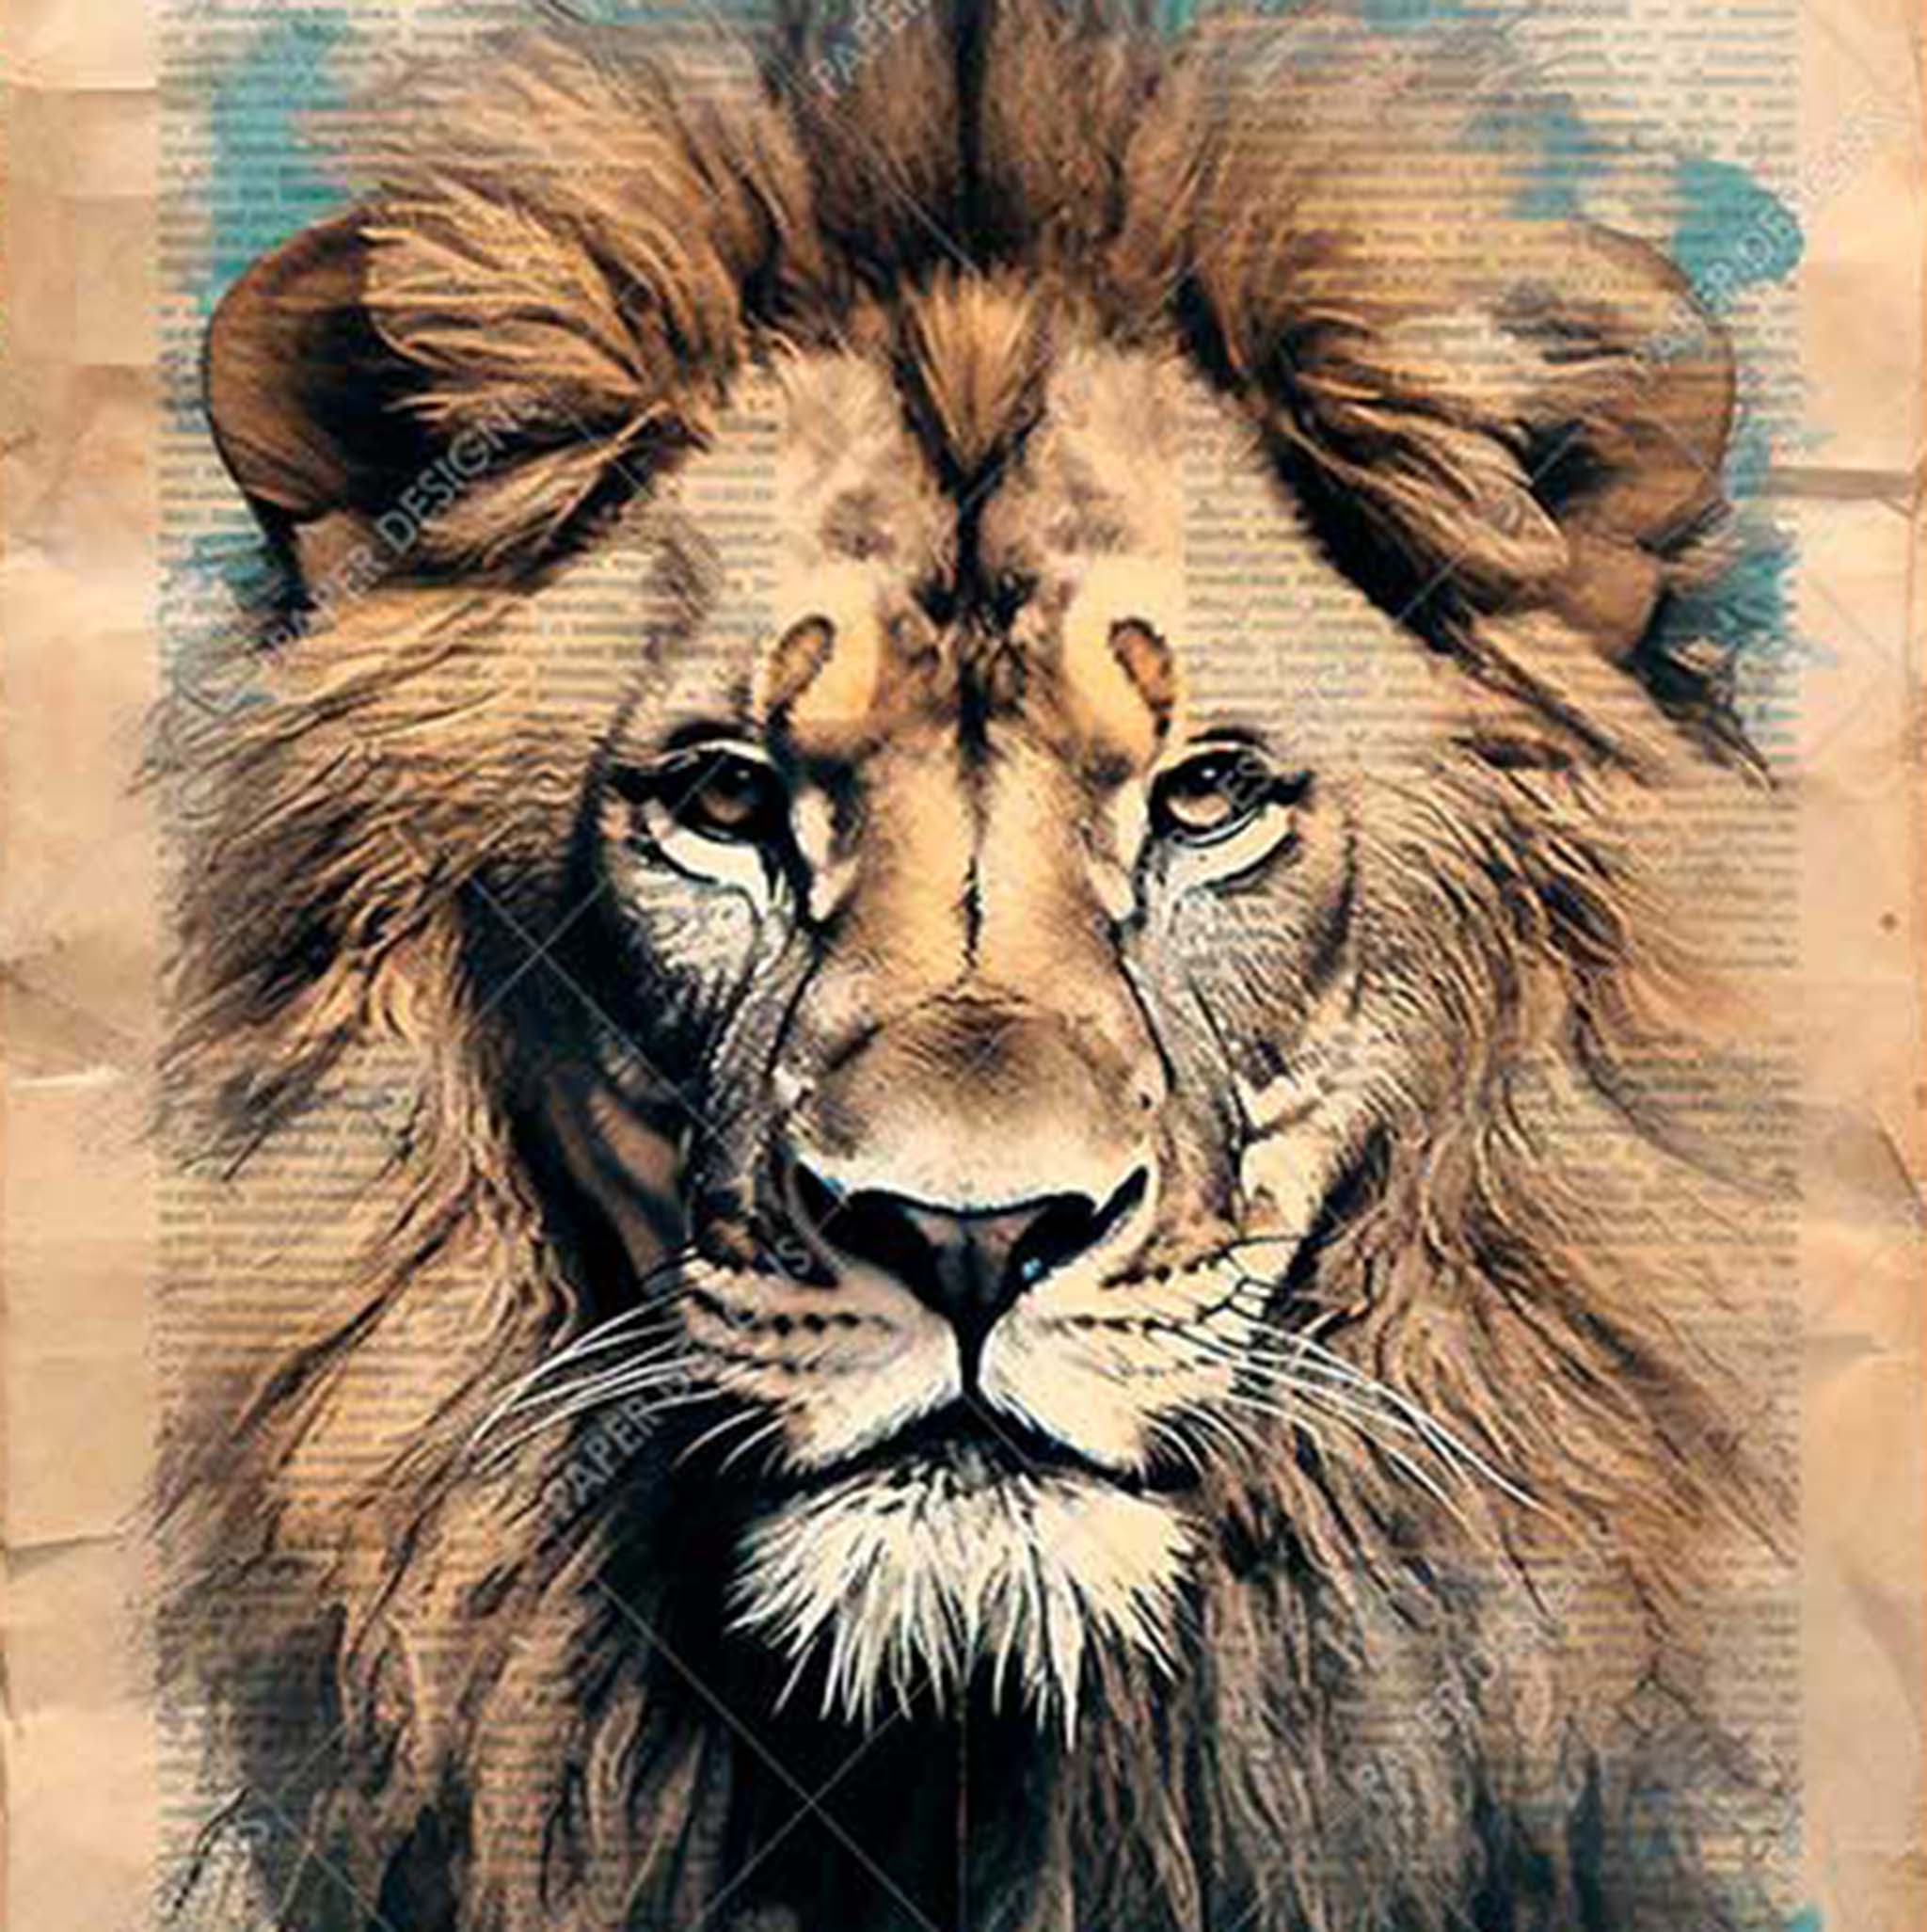 A1 rice paper design that features a vintage sepia tone background and a majestic lion.